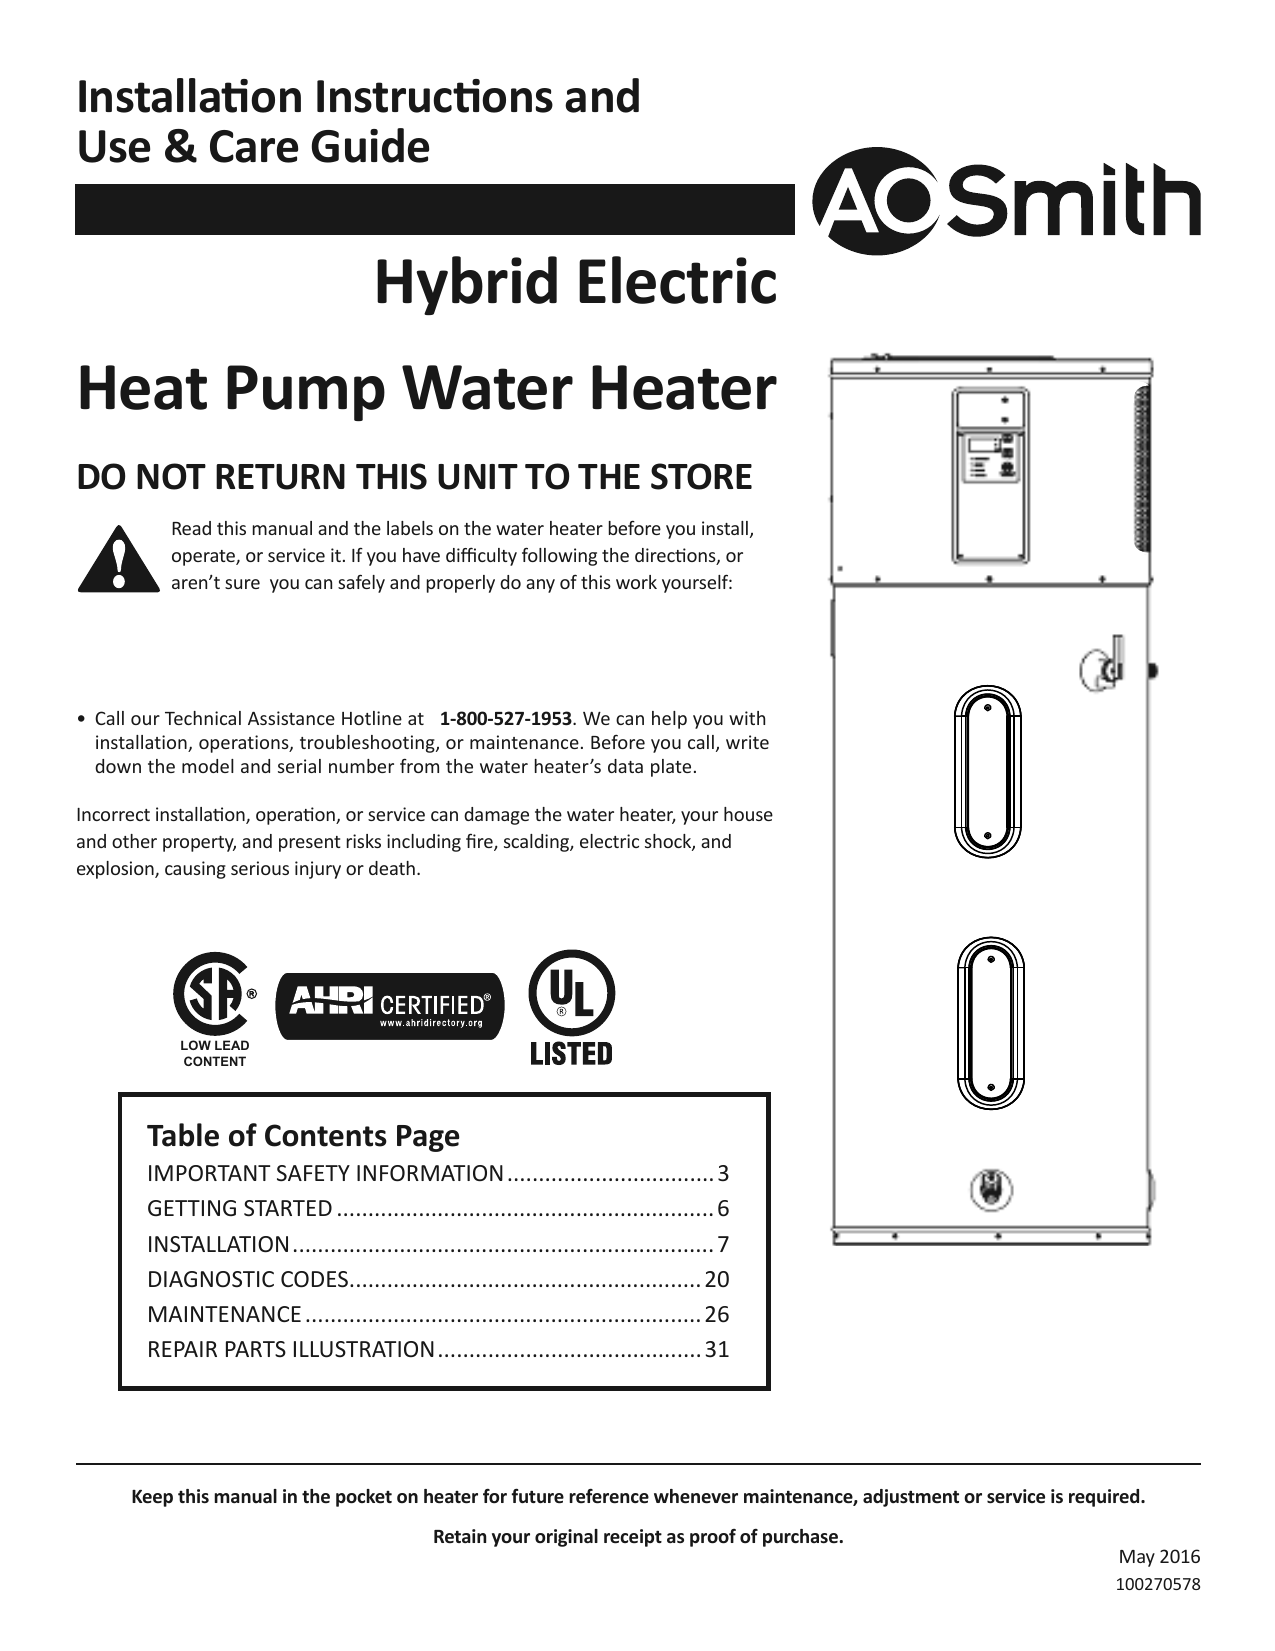 208v Neea Updates Indd A O Smith Water Heaters Manualzz